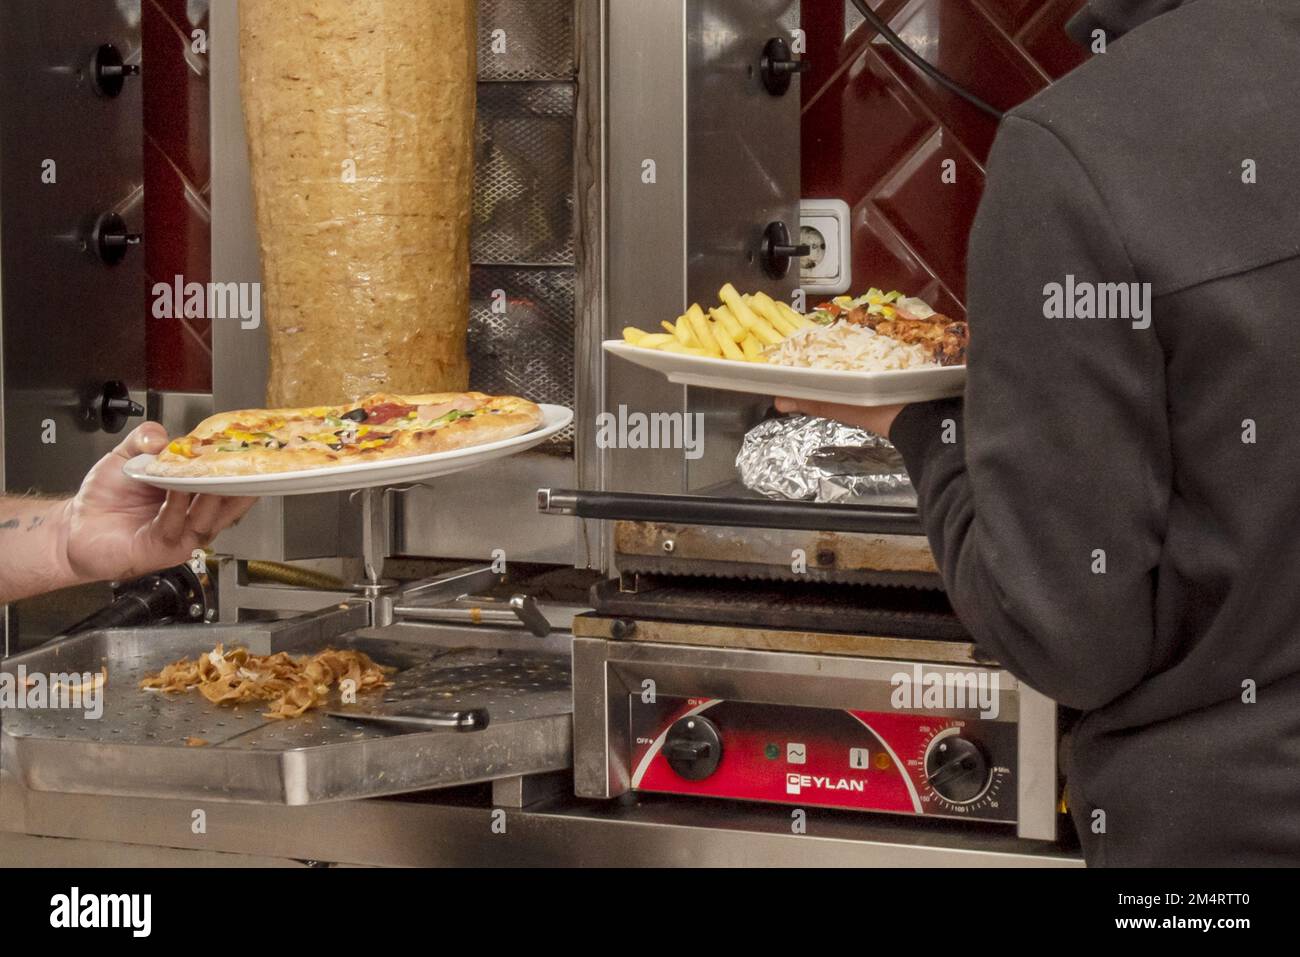 Employees of a kebab preparing typical kebab menu dishes with fries and rice and a frozen dough pizza Stock Photo